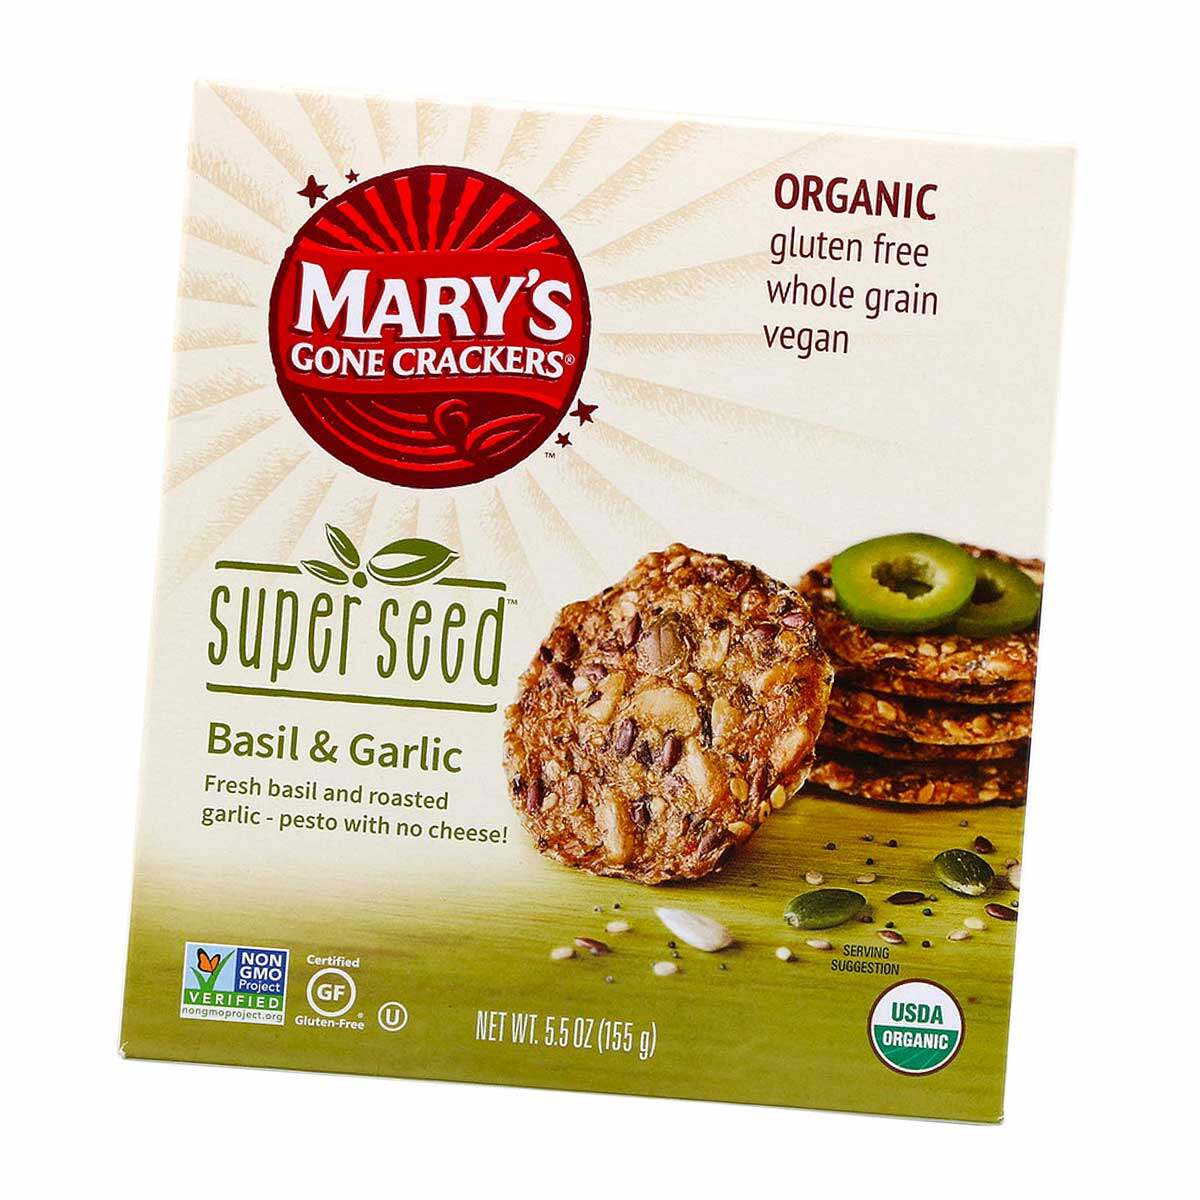 Mary's Gone Crackers, Super Seed Crackers